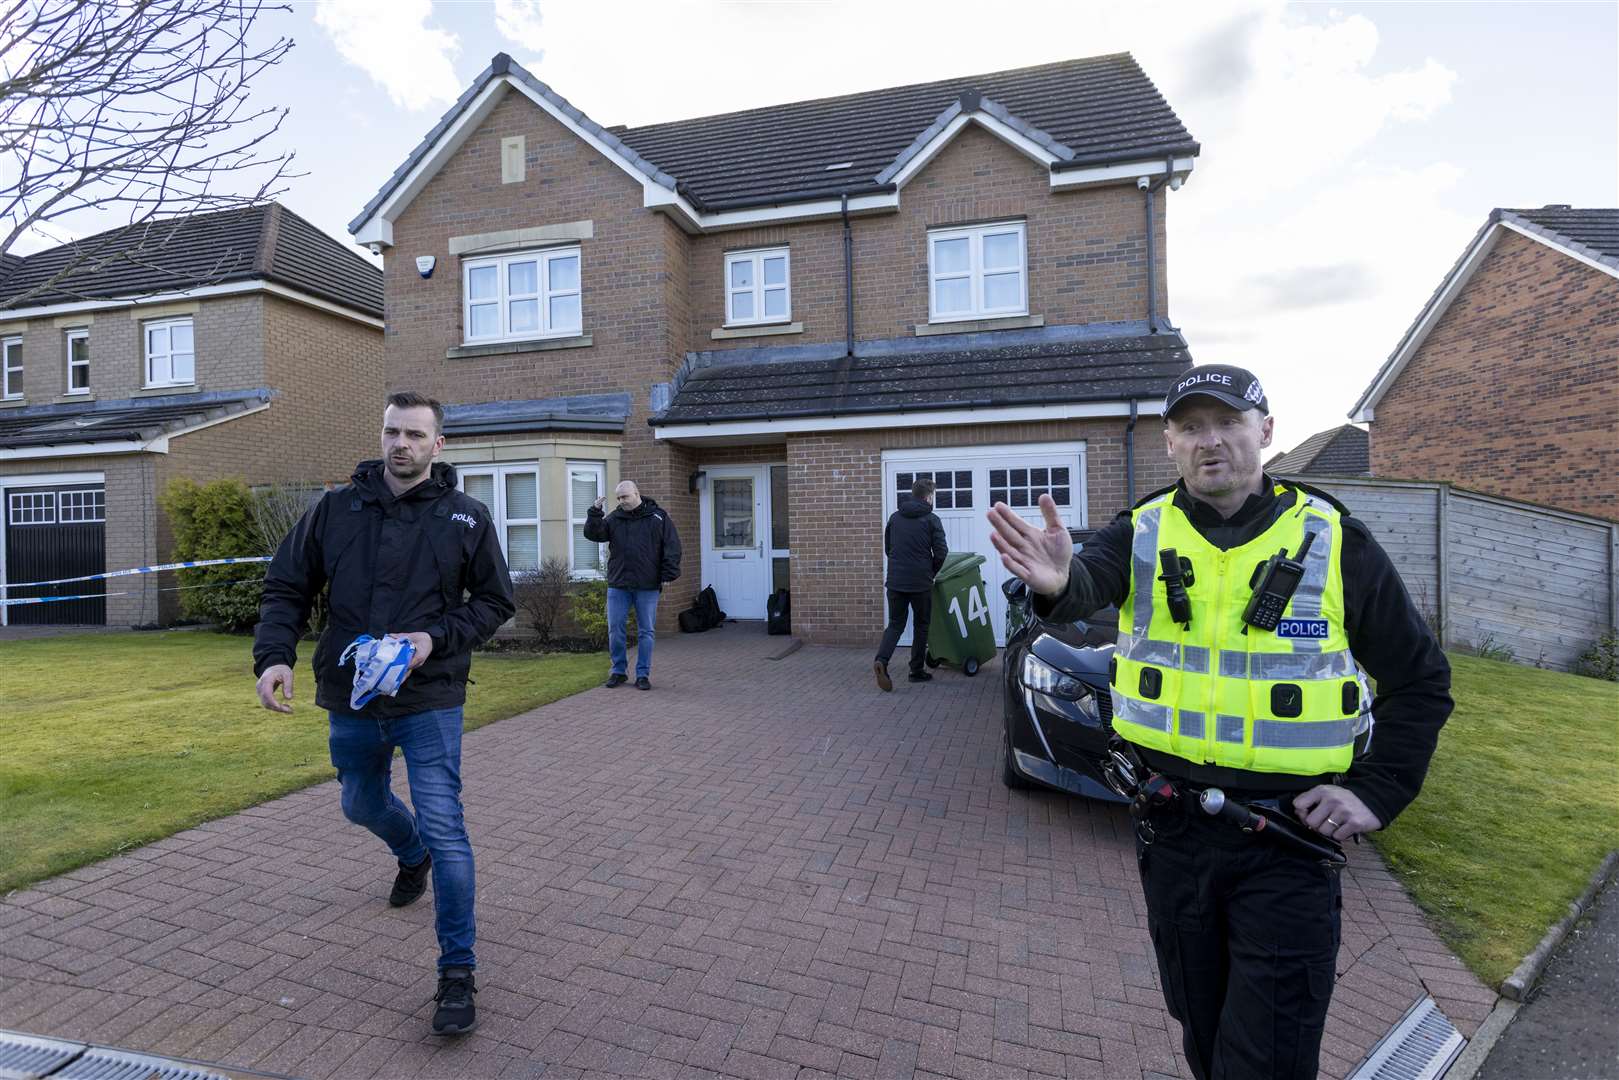 Police last week searched the home of former SNP chief executive Peter Murrell and his wife Nicola Sturgeon (Robert Perry/PA)